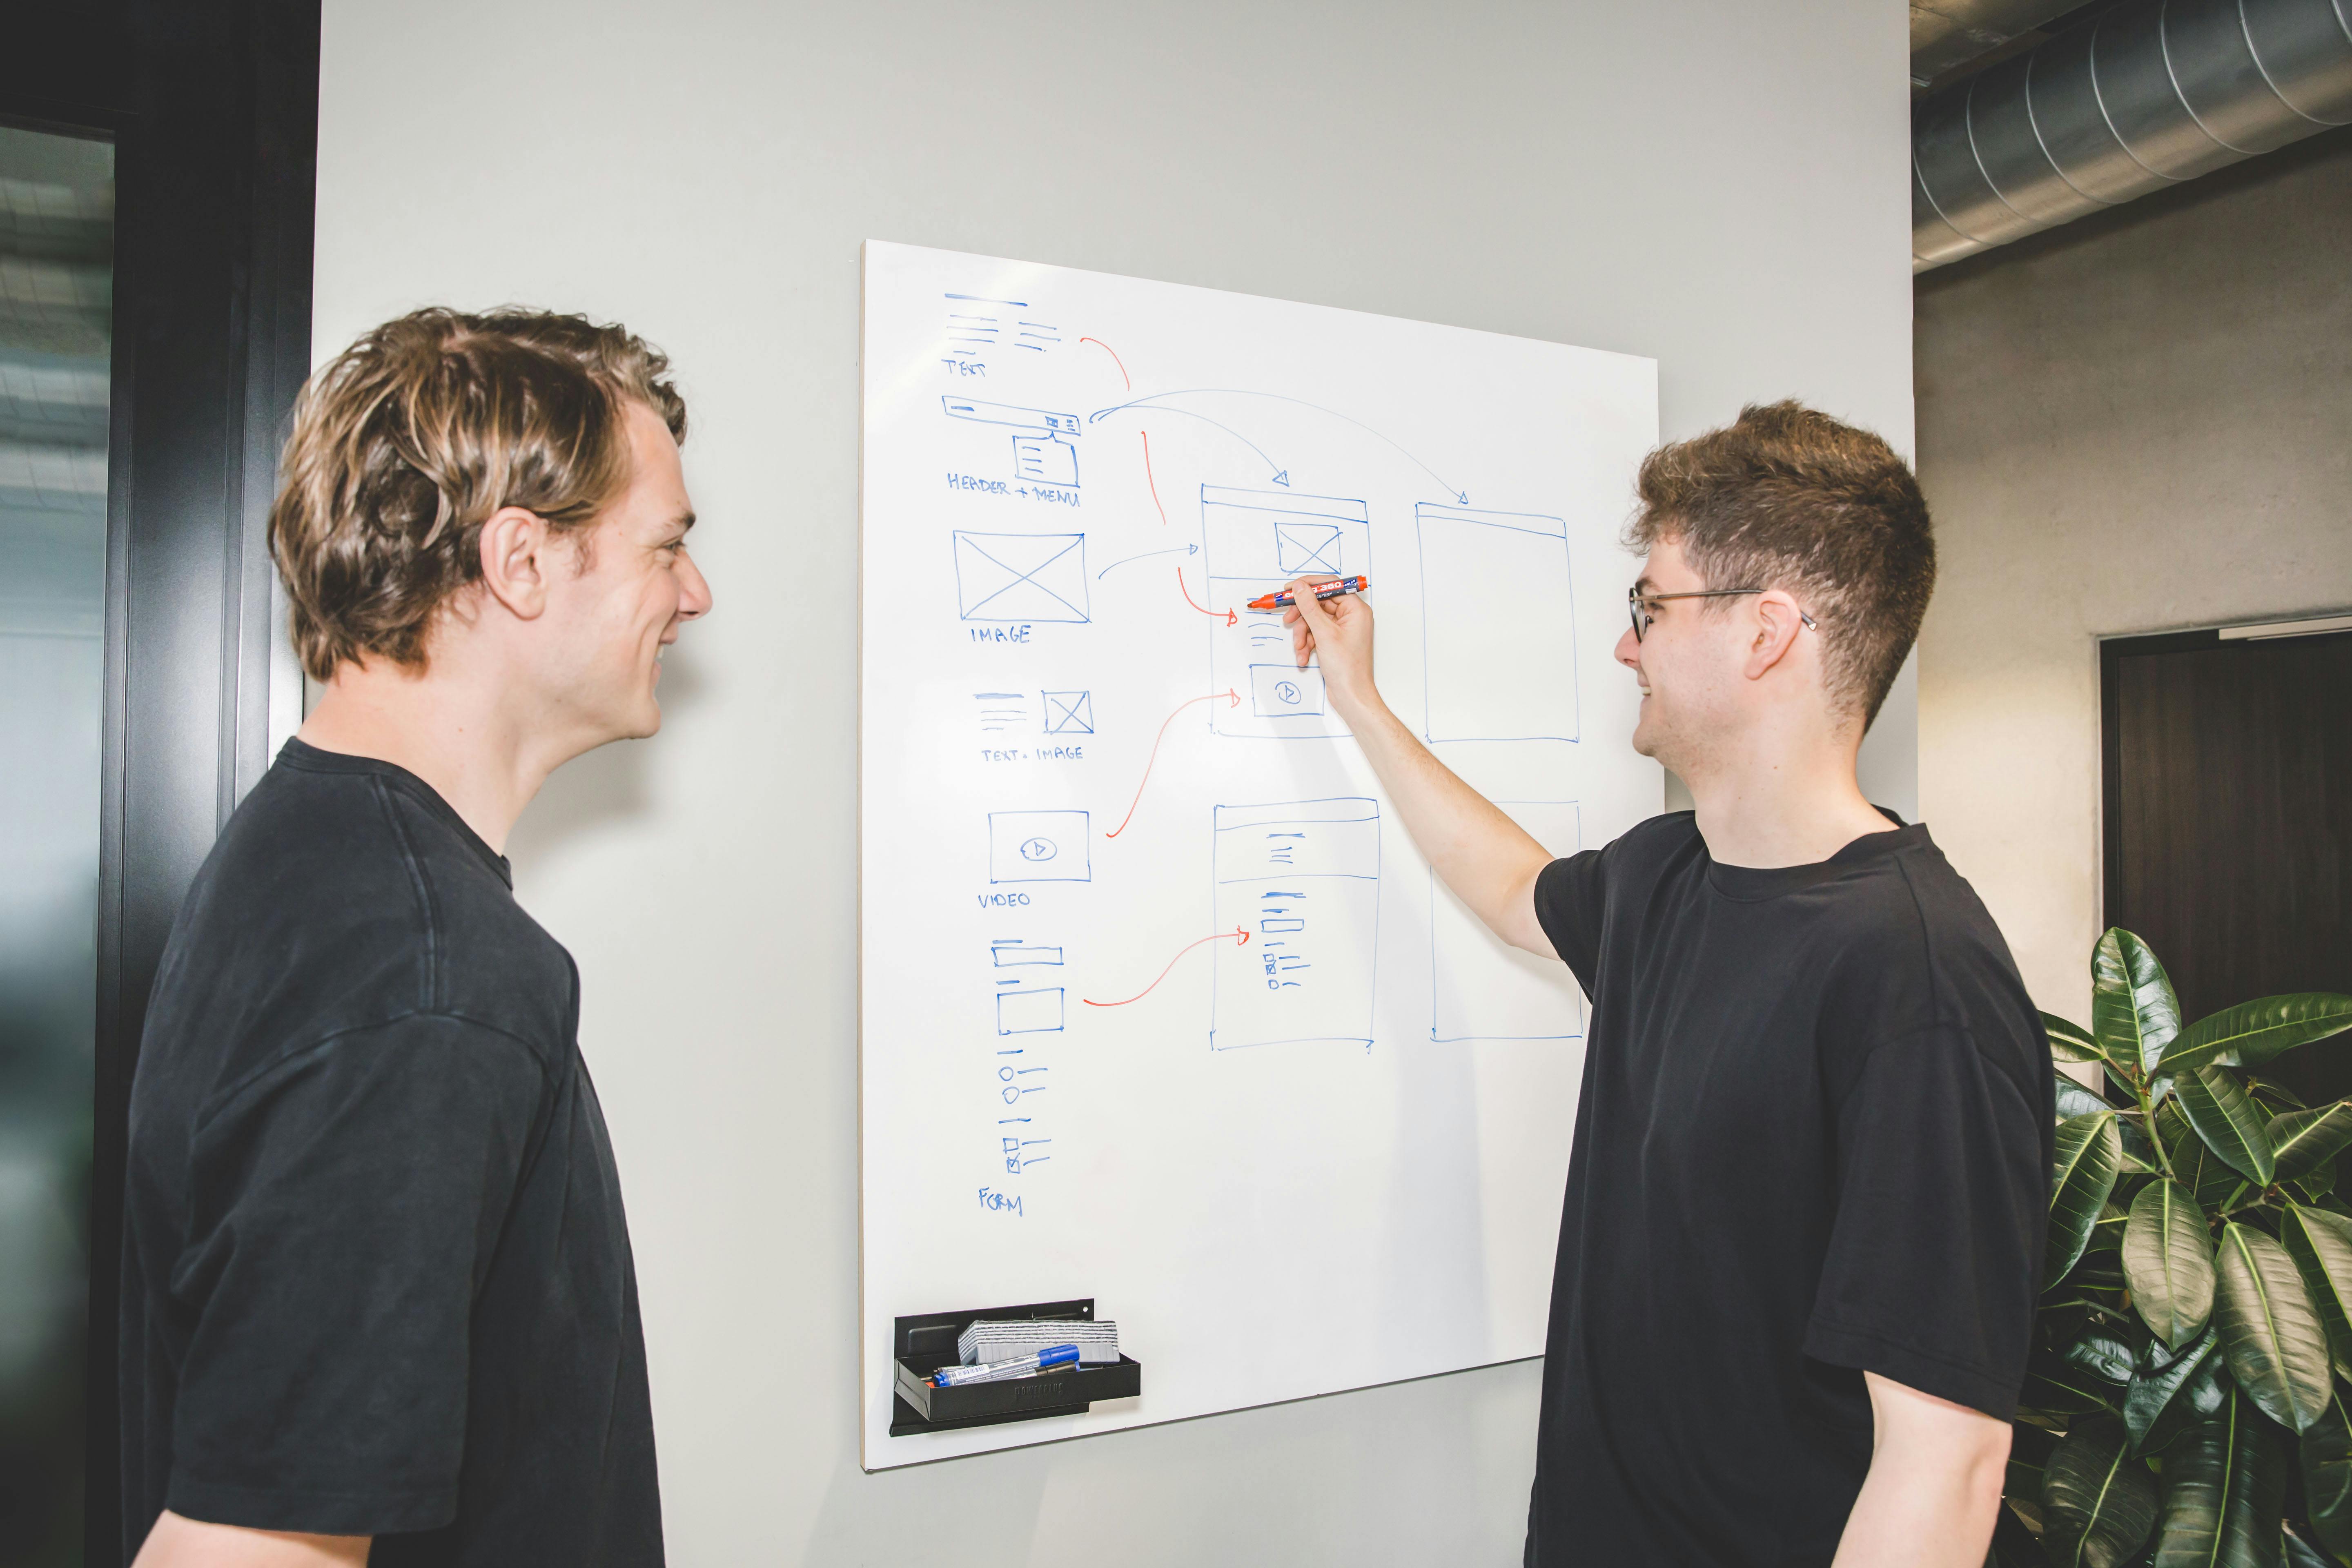 Two young men looking at a whiteboard, one is drawing a technical structure